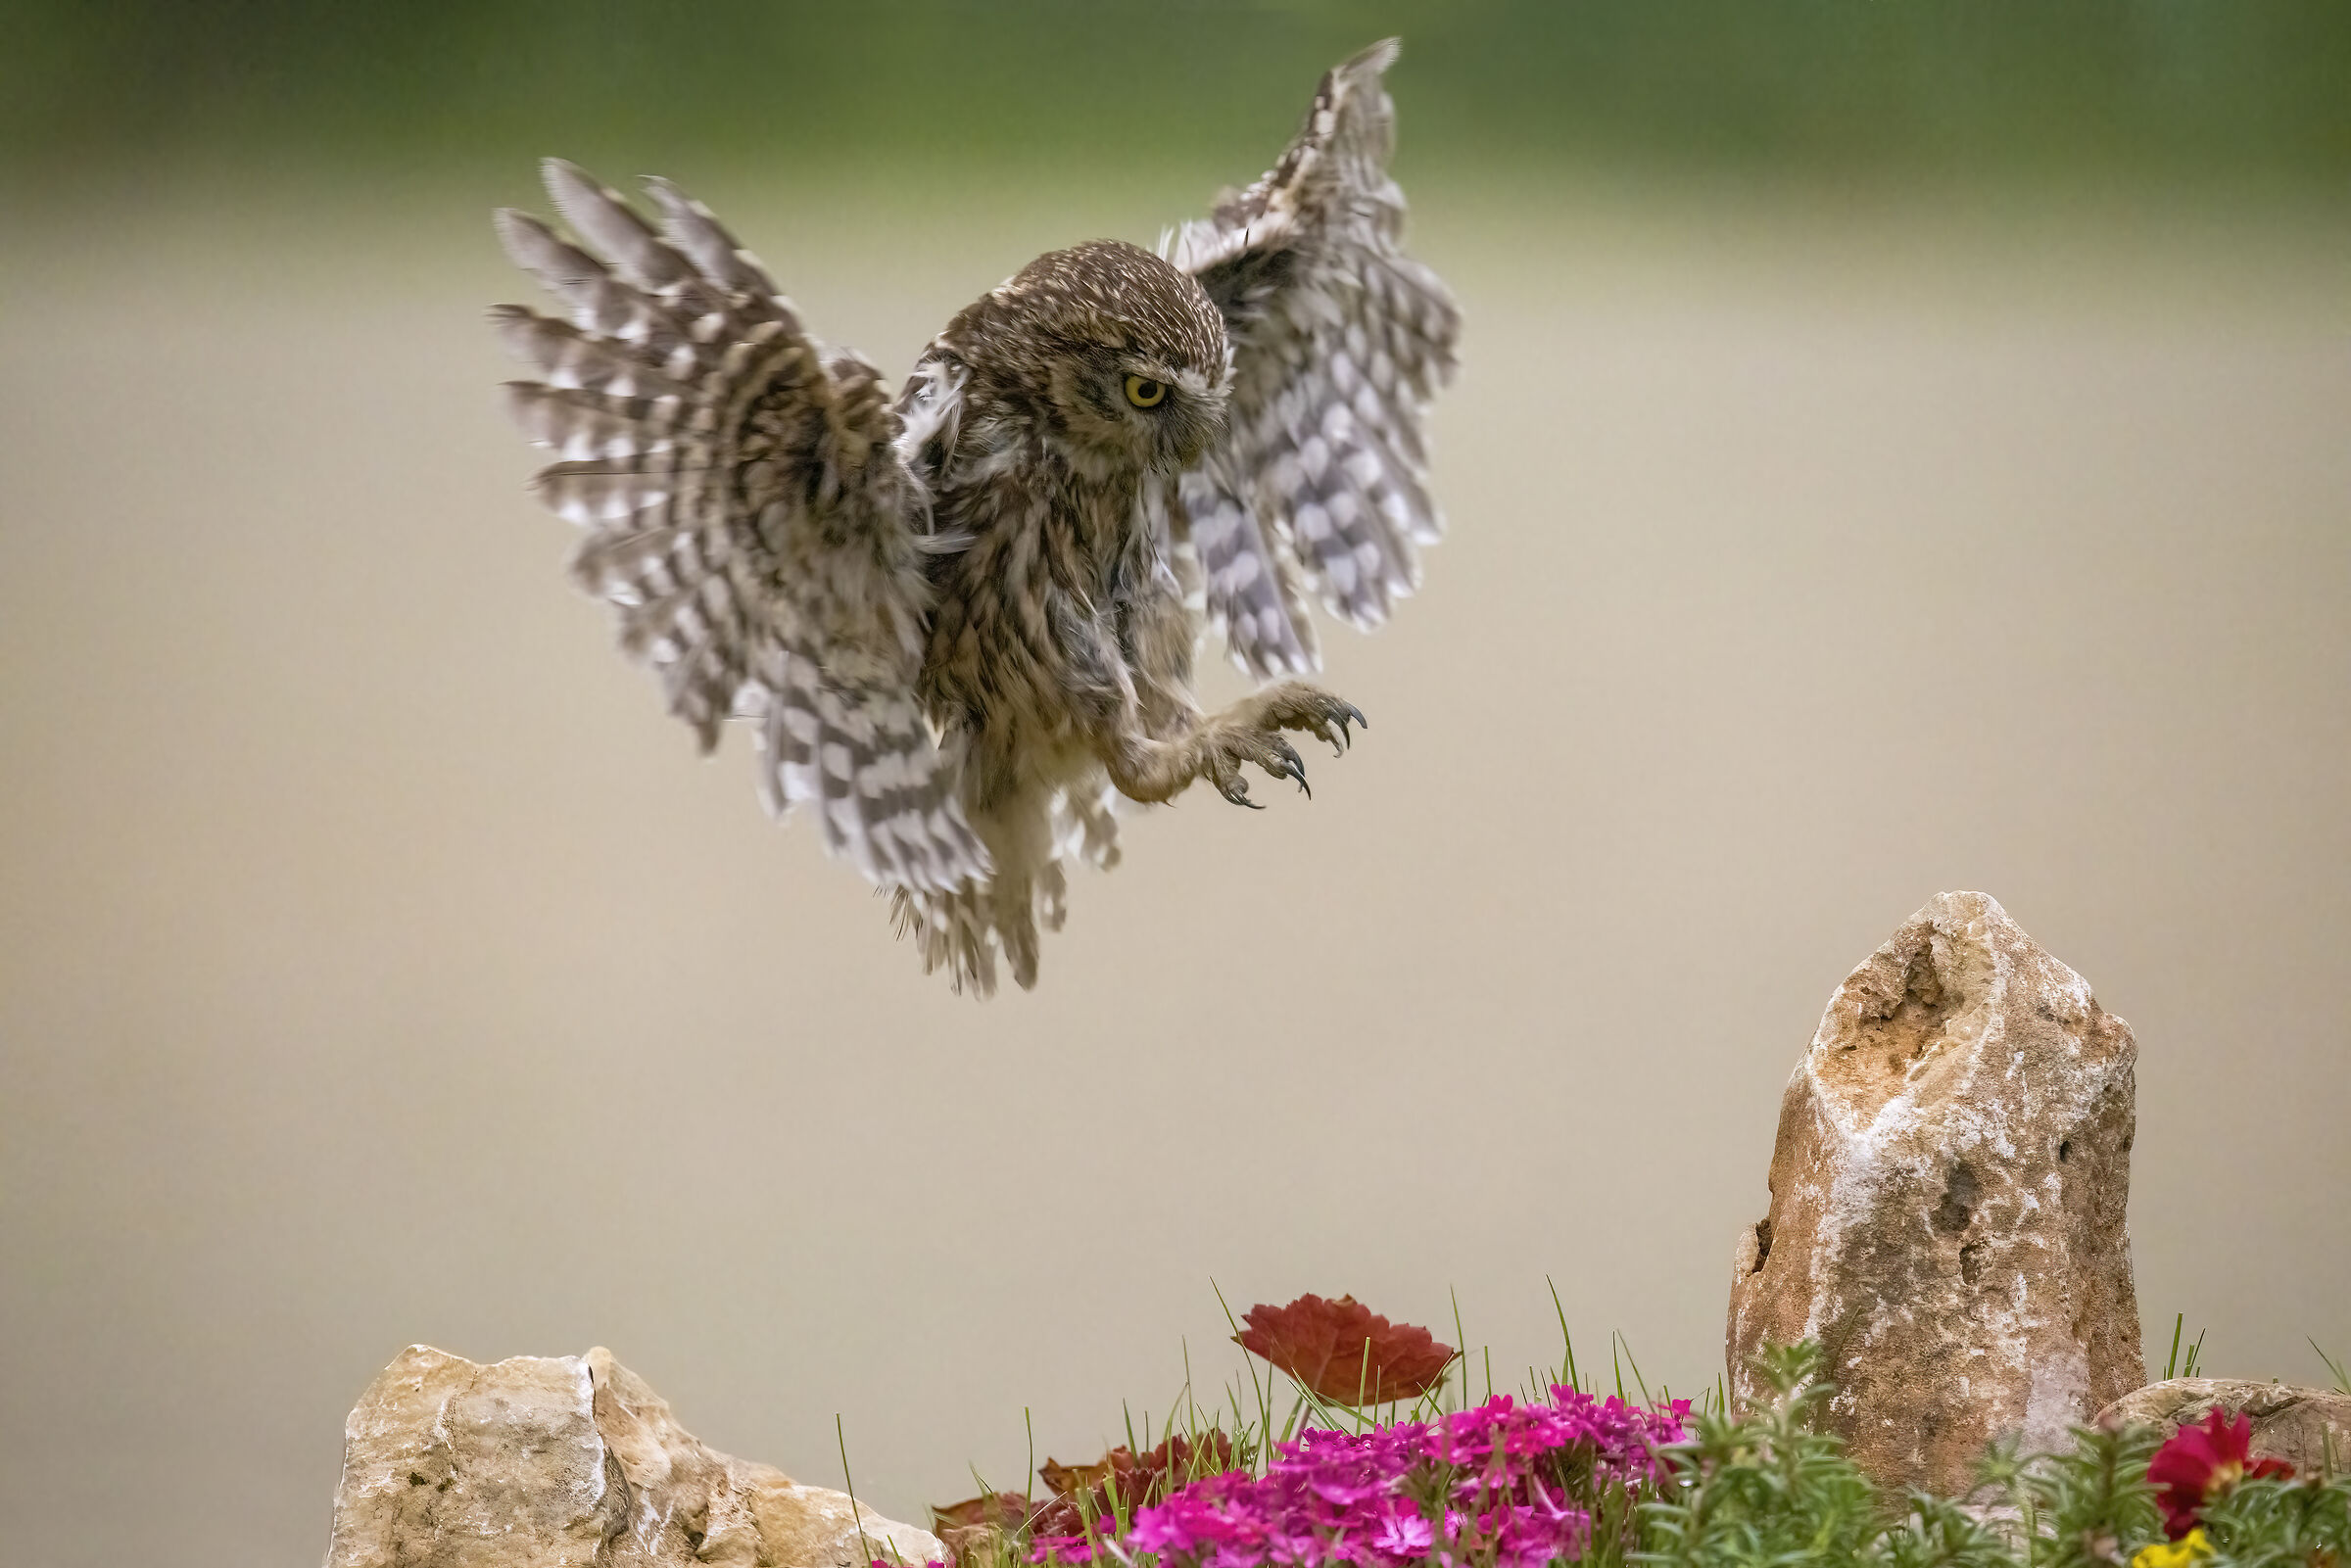 The Silent Arrival of the Owl...